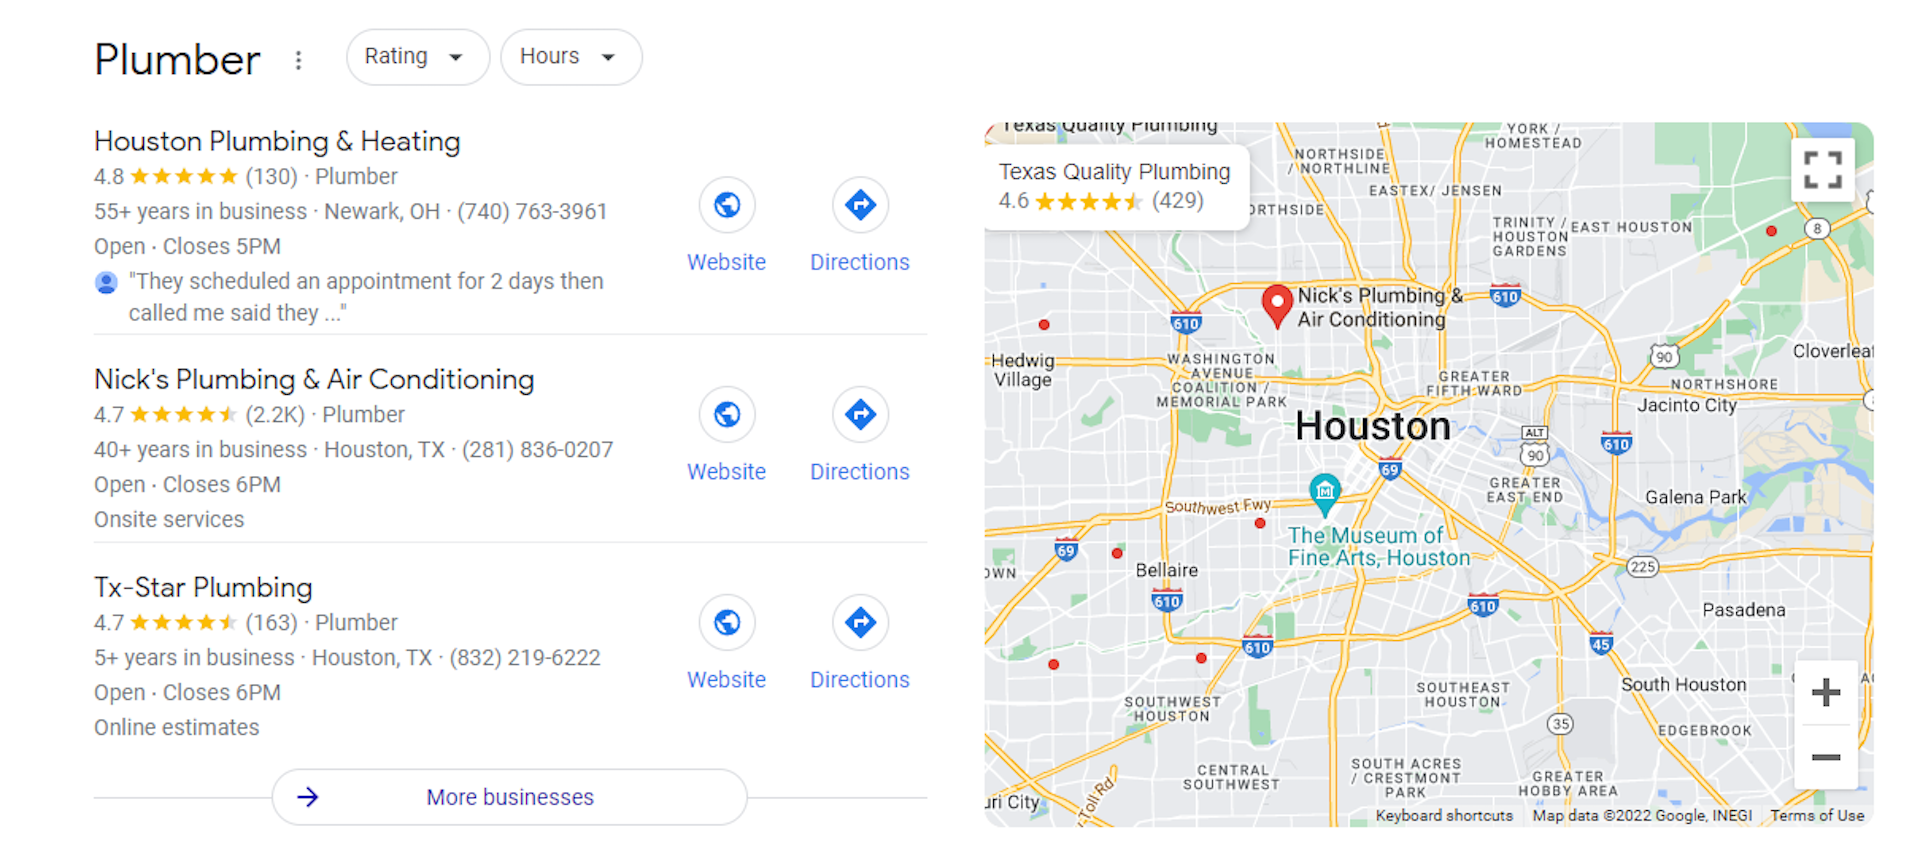 Local SEO Strategies For Plumbers And Other Trades